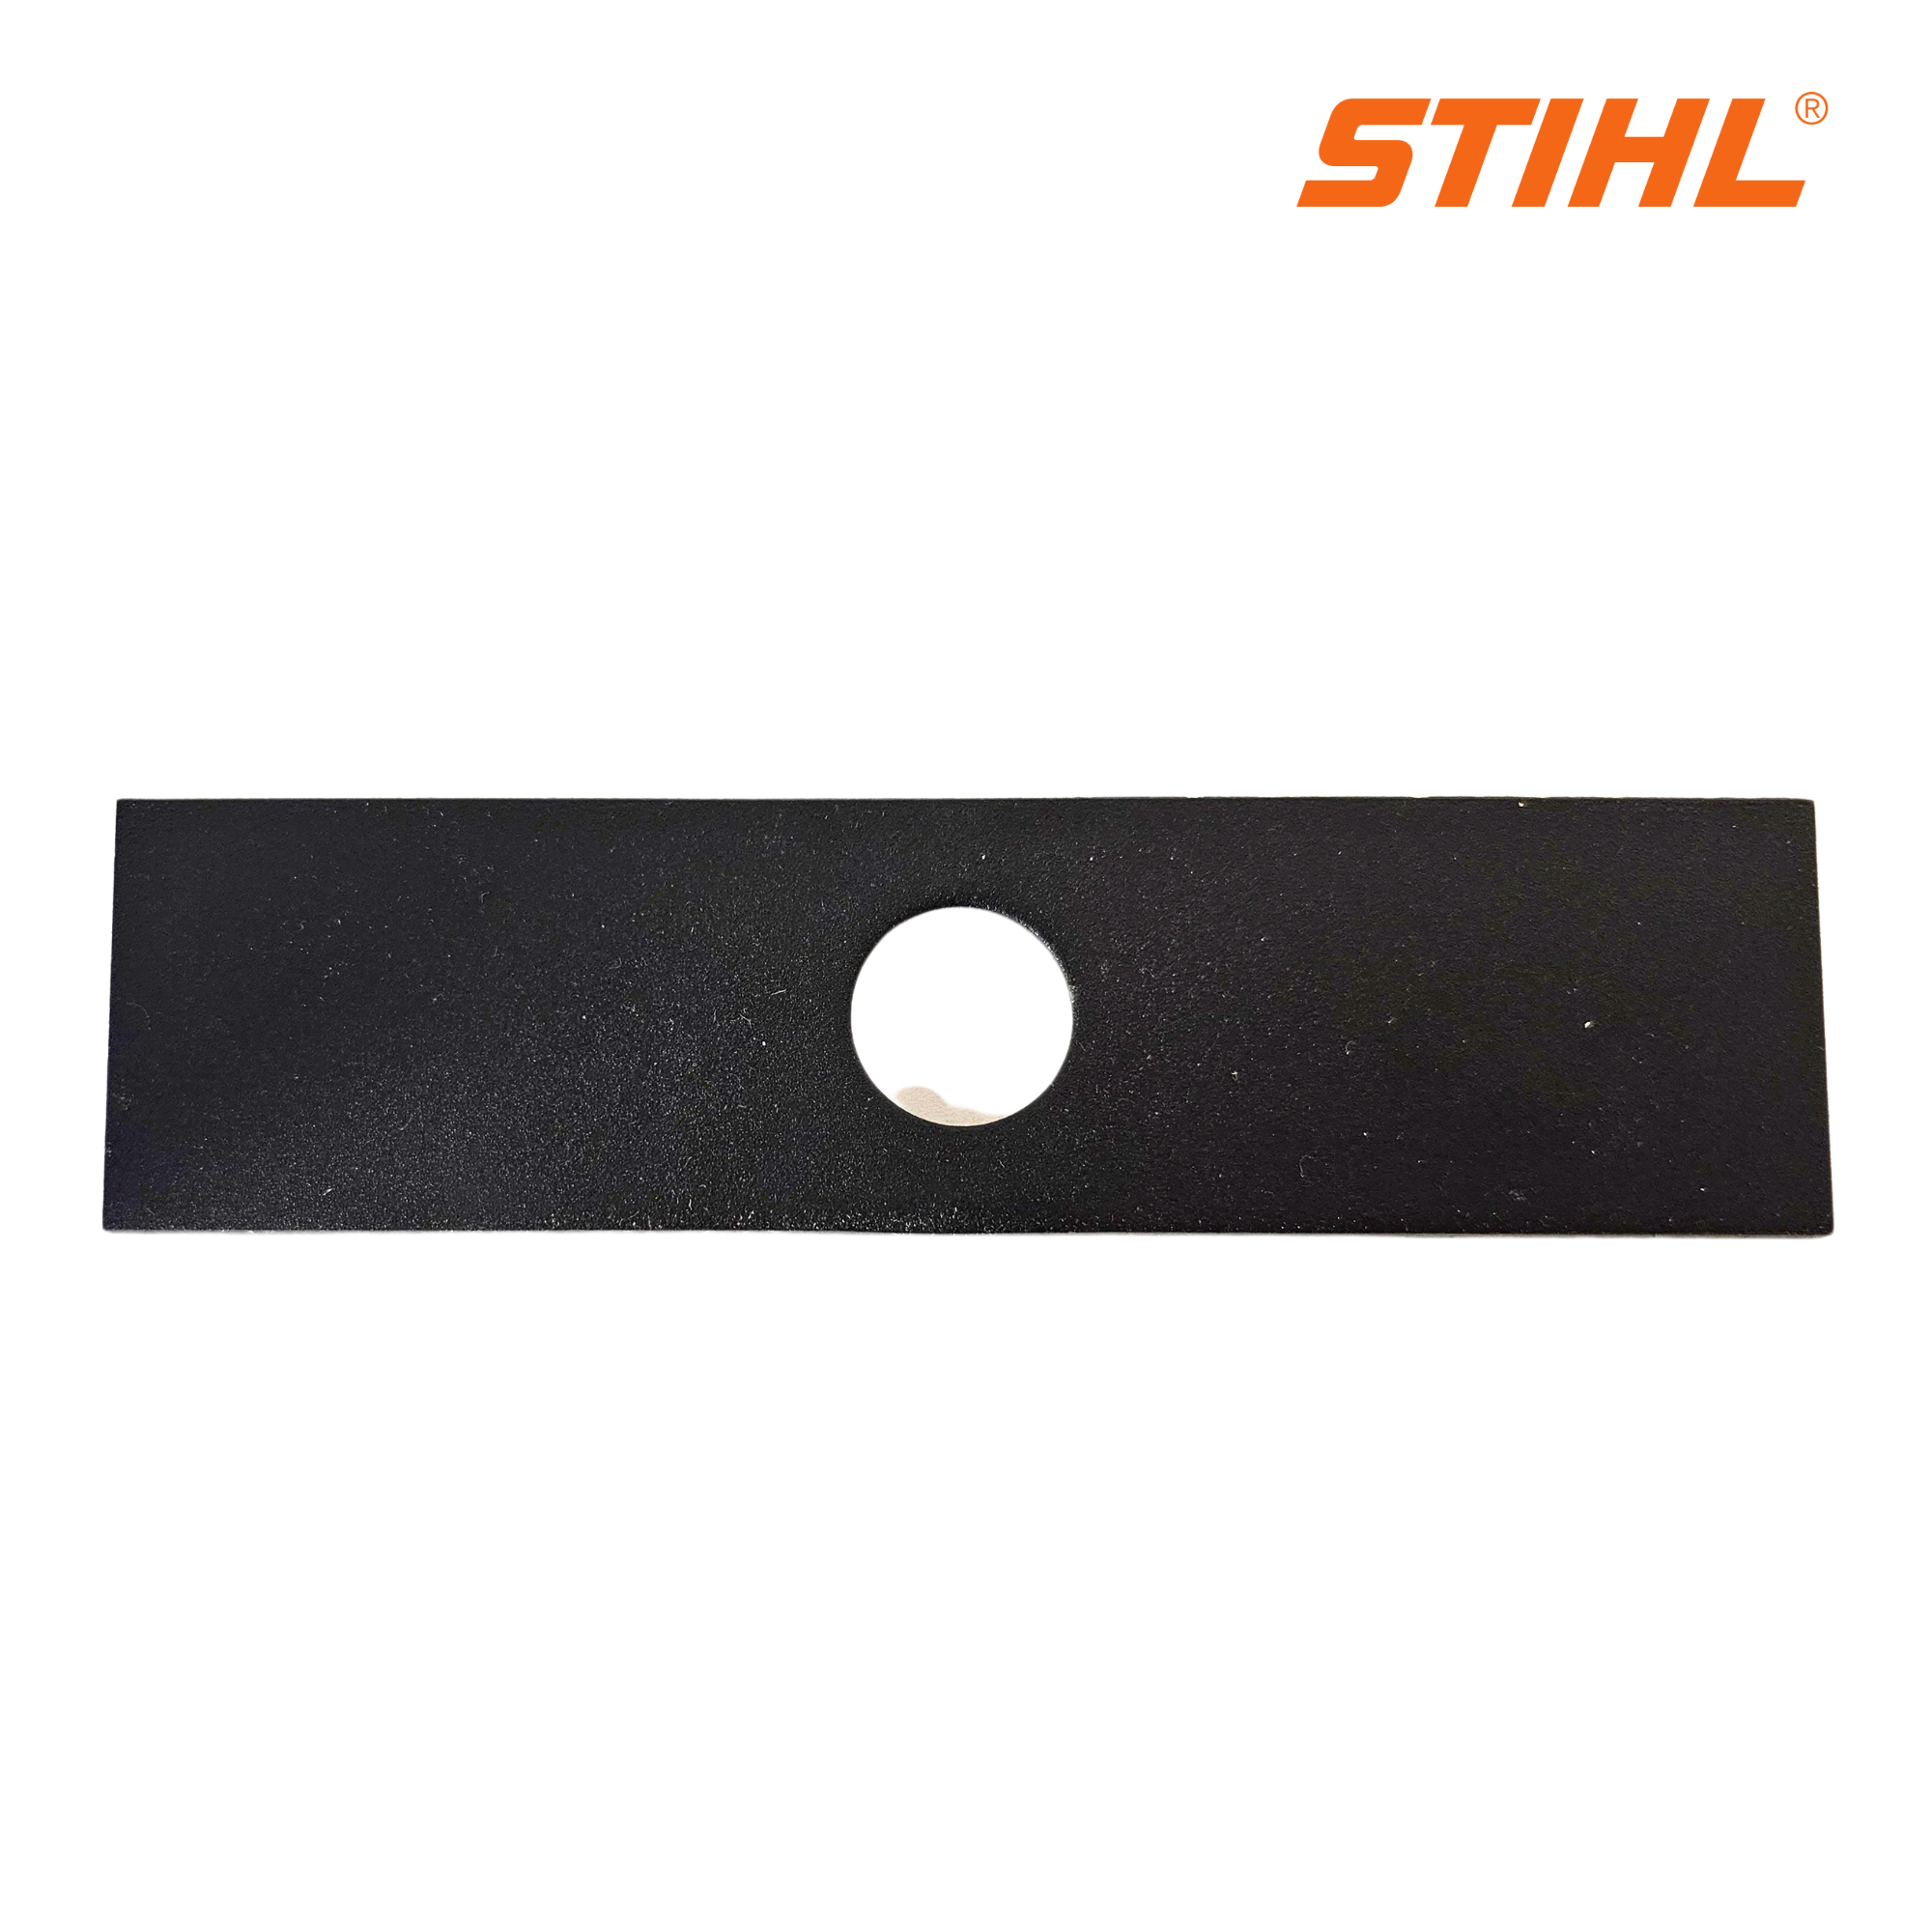 Stihl Edger Blade, 8in.L | 3.8mm Thick | 4133 713 4102